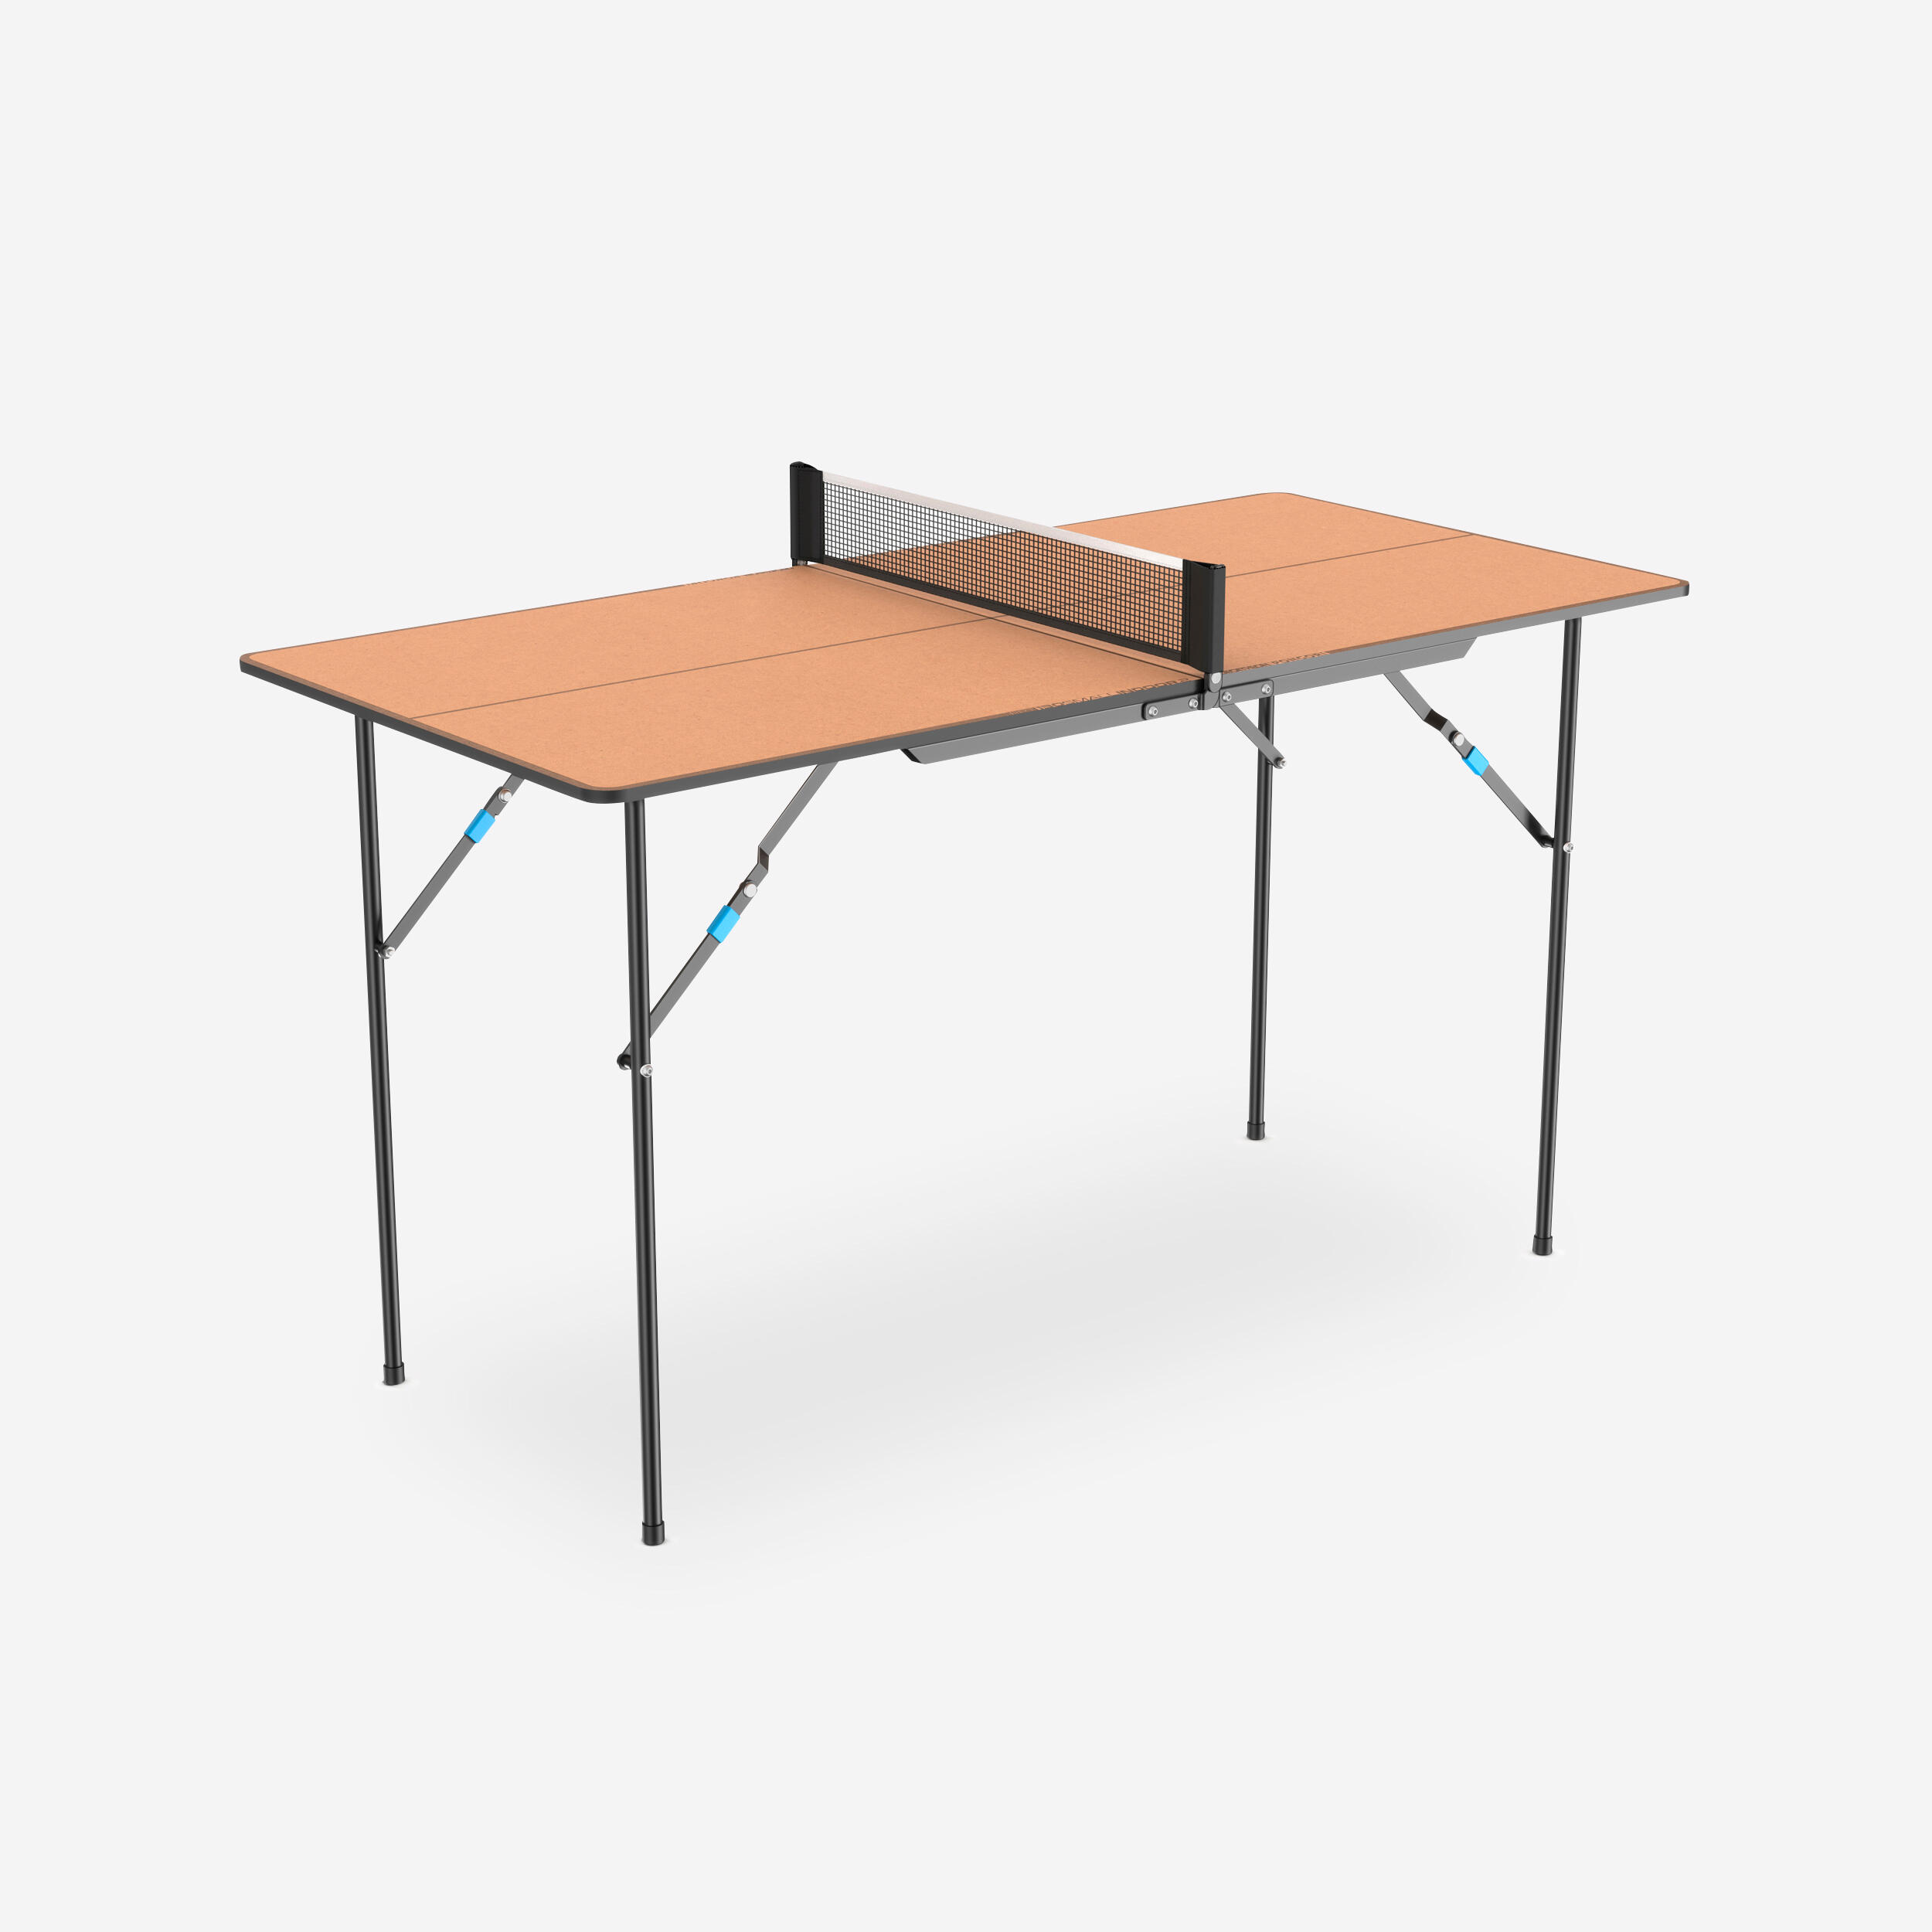 PONGORI Table Tennis Table PPT 130 Small Indoor.2 